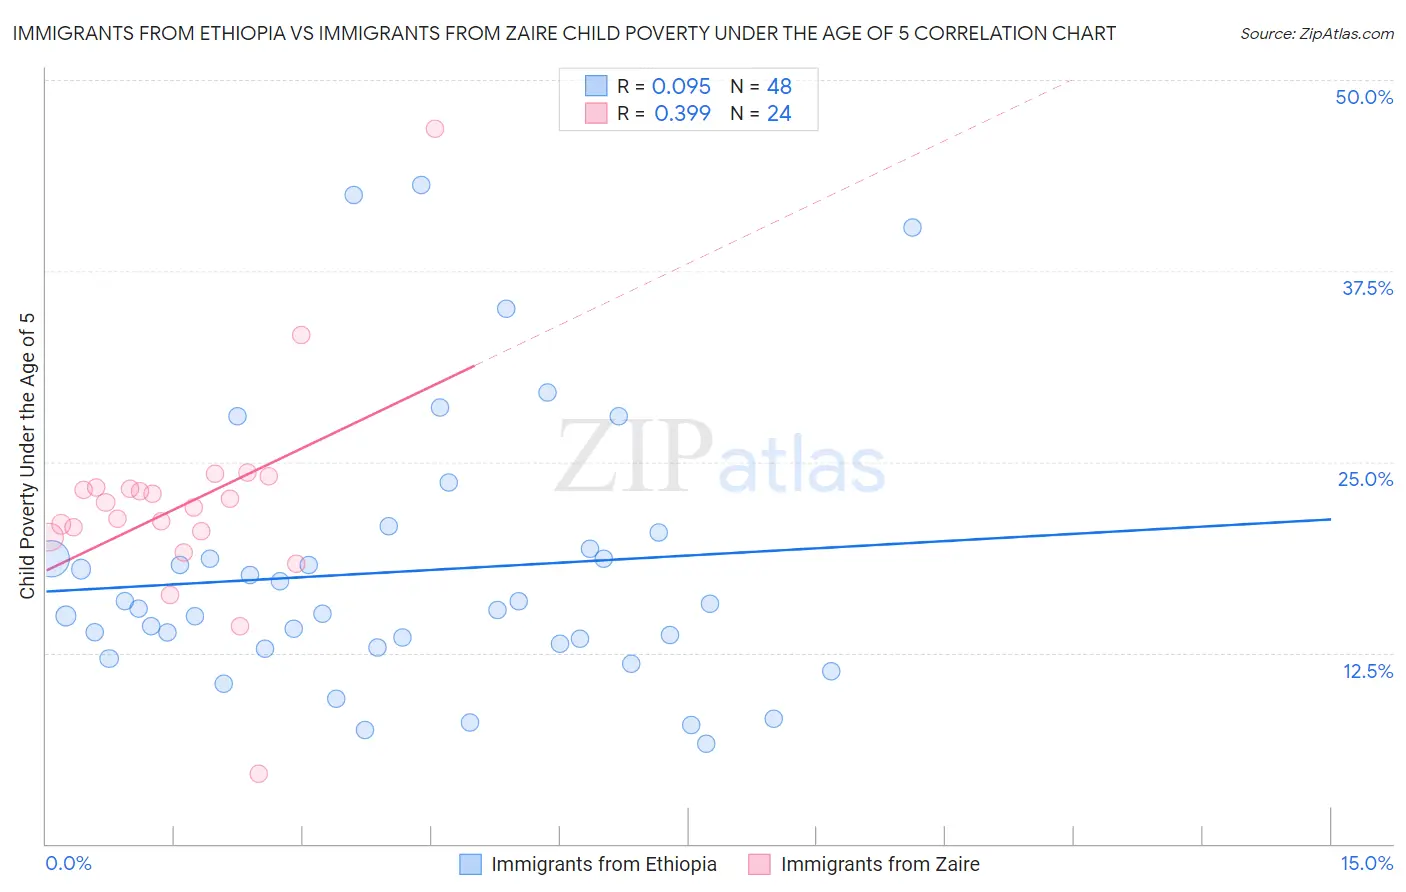 Immigrants from Ethiopia vs Immigrants from Zaire Child Poverty Under the Age of 5